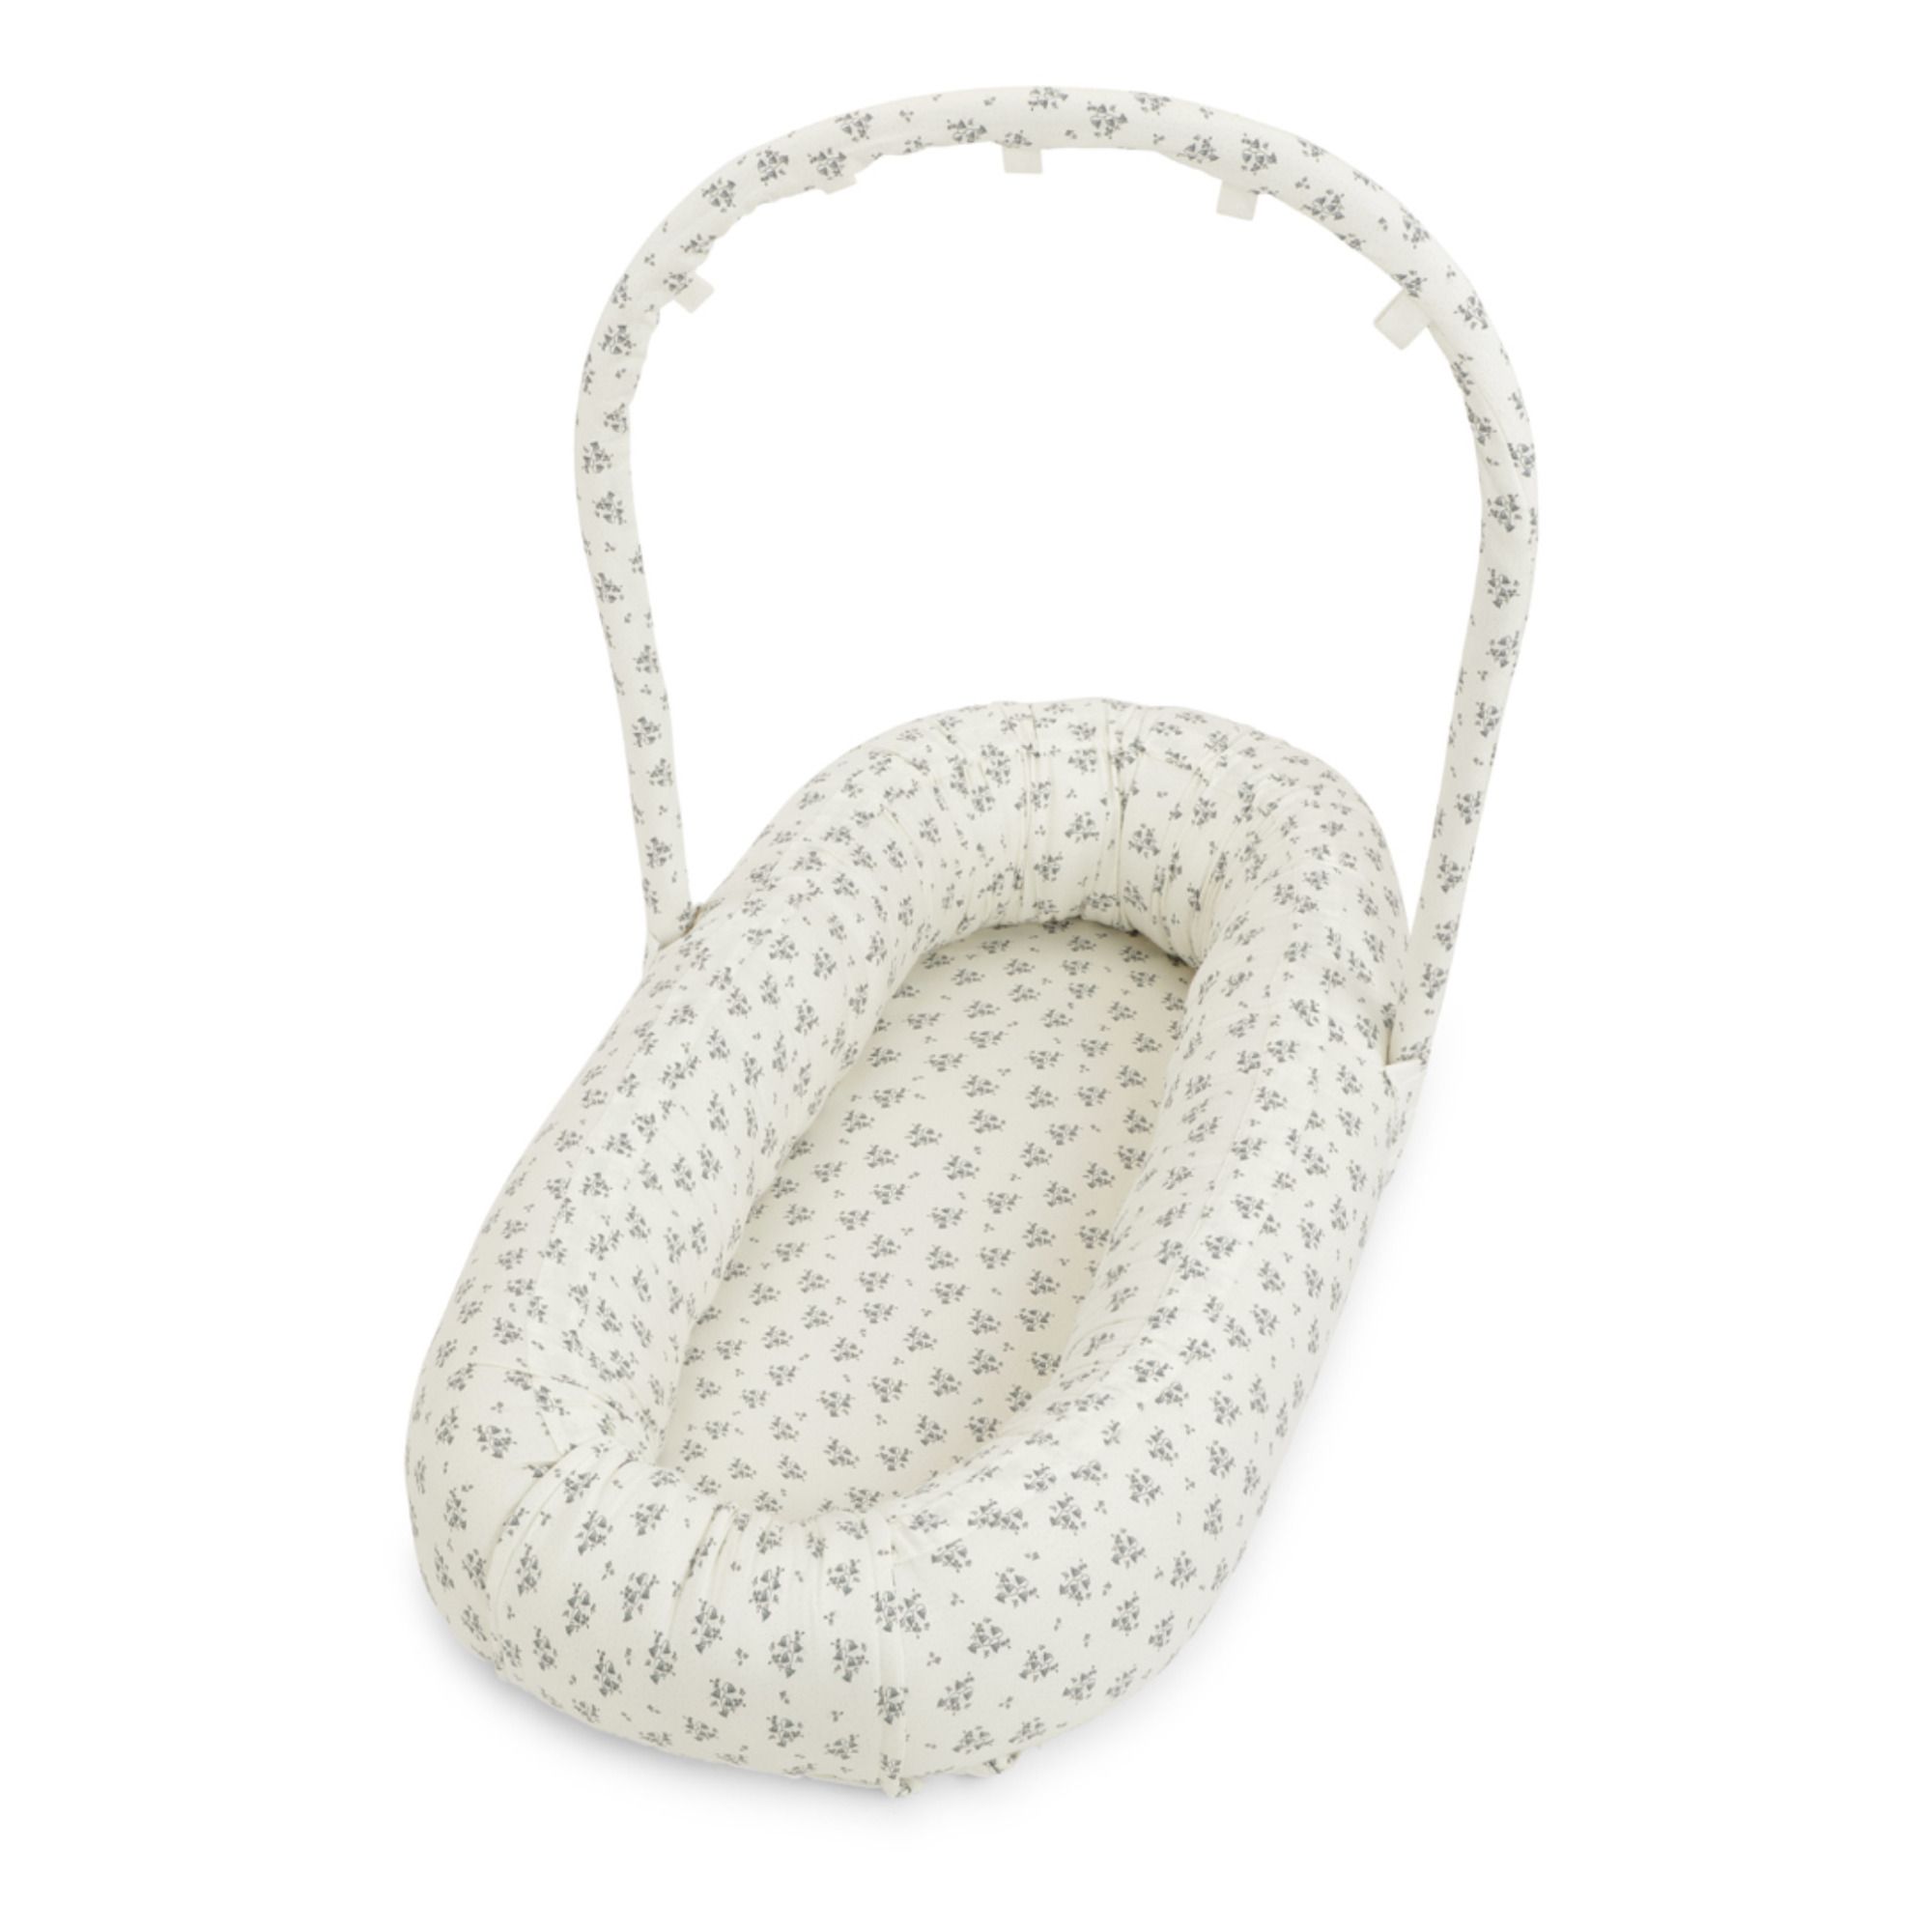 Bluebell Organic Cotton Baby Nest with Removable Arch | Blau- Produktbild Nr. 0